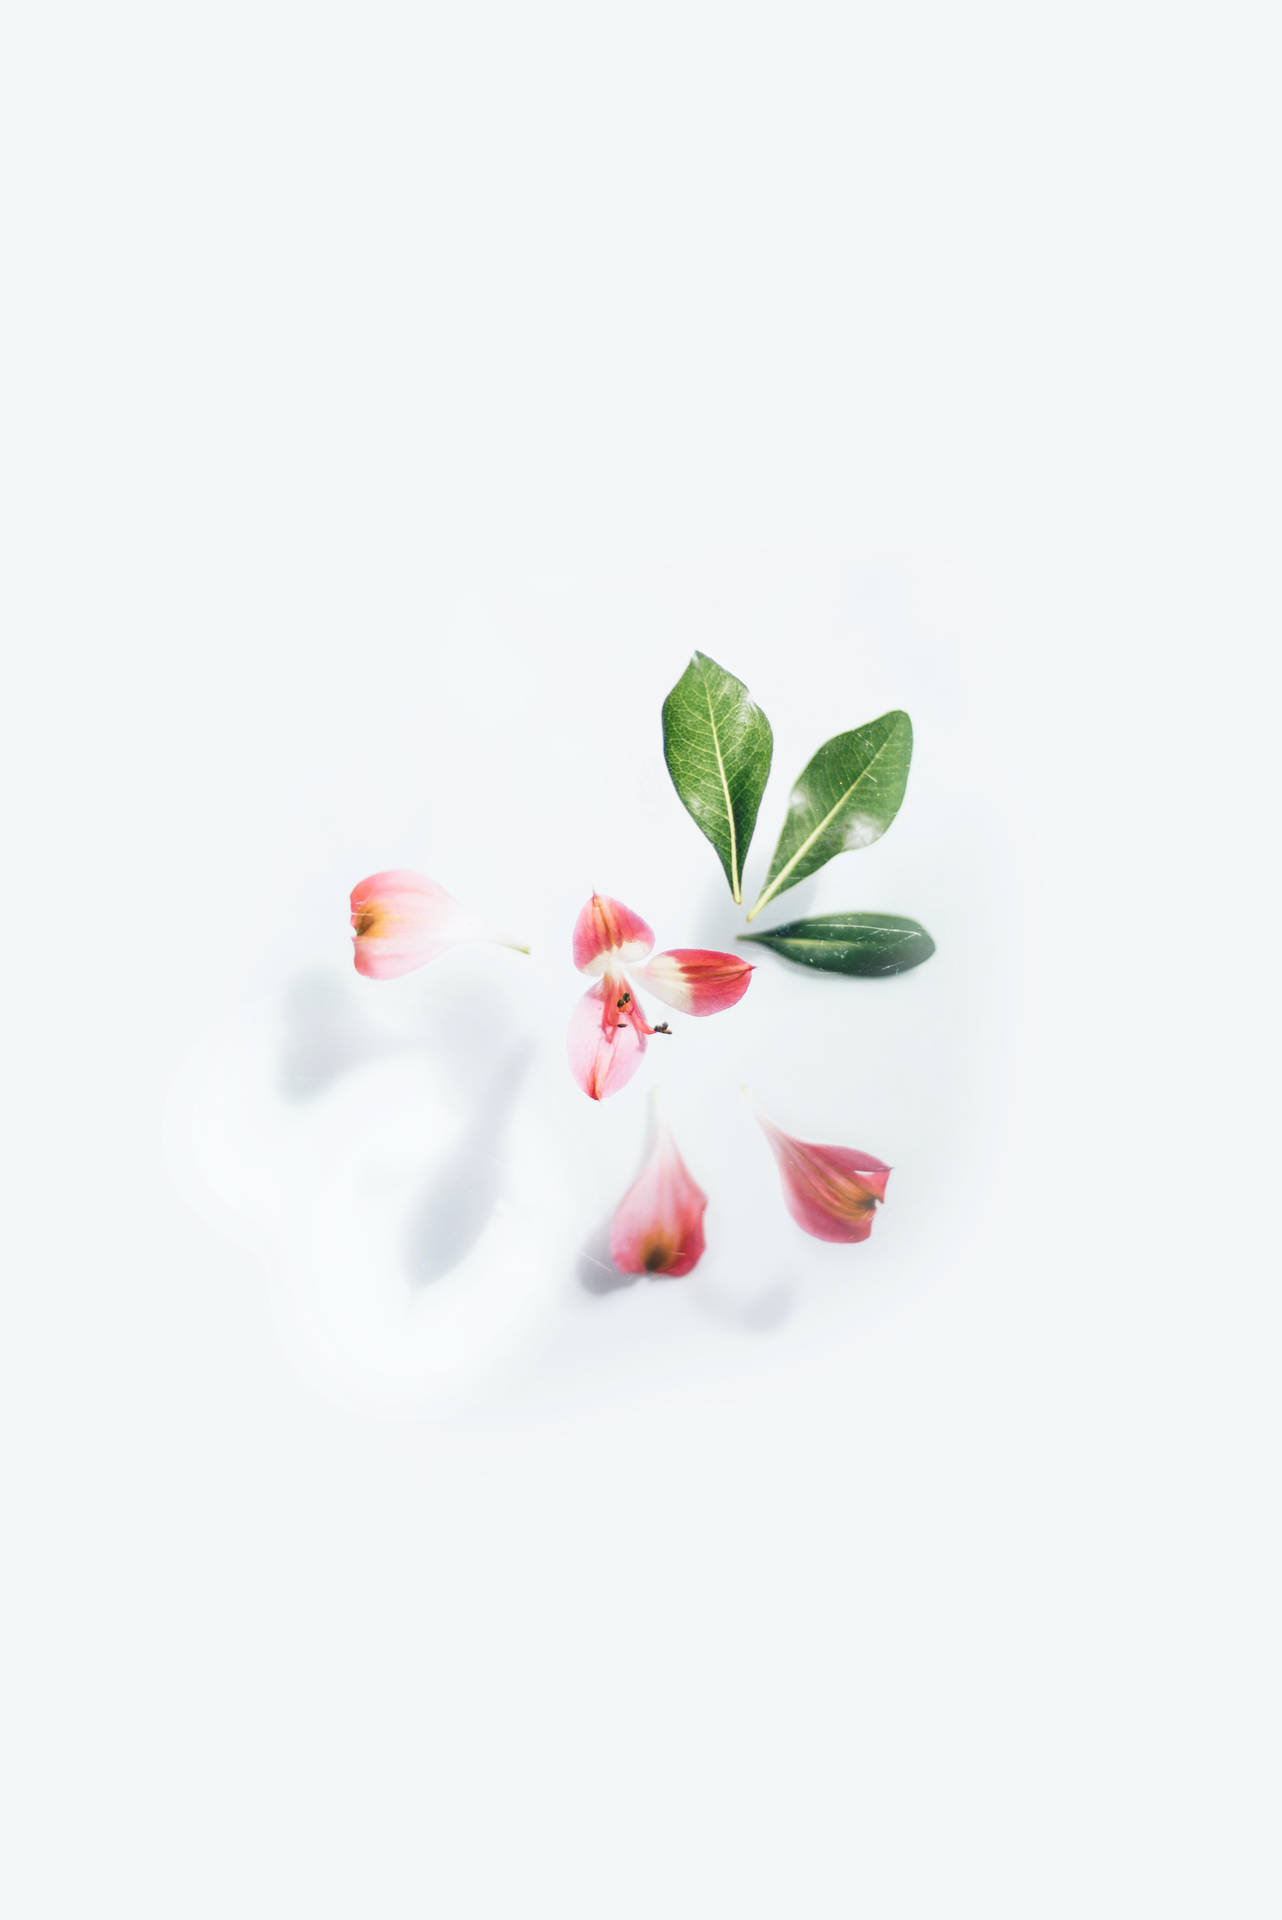 Pink Petals In White Background